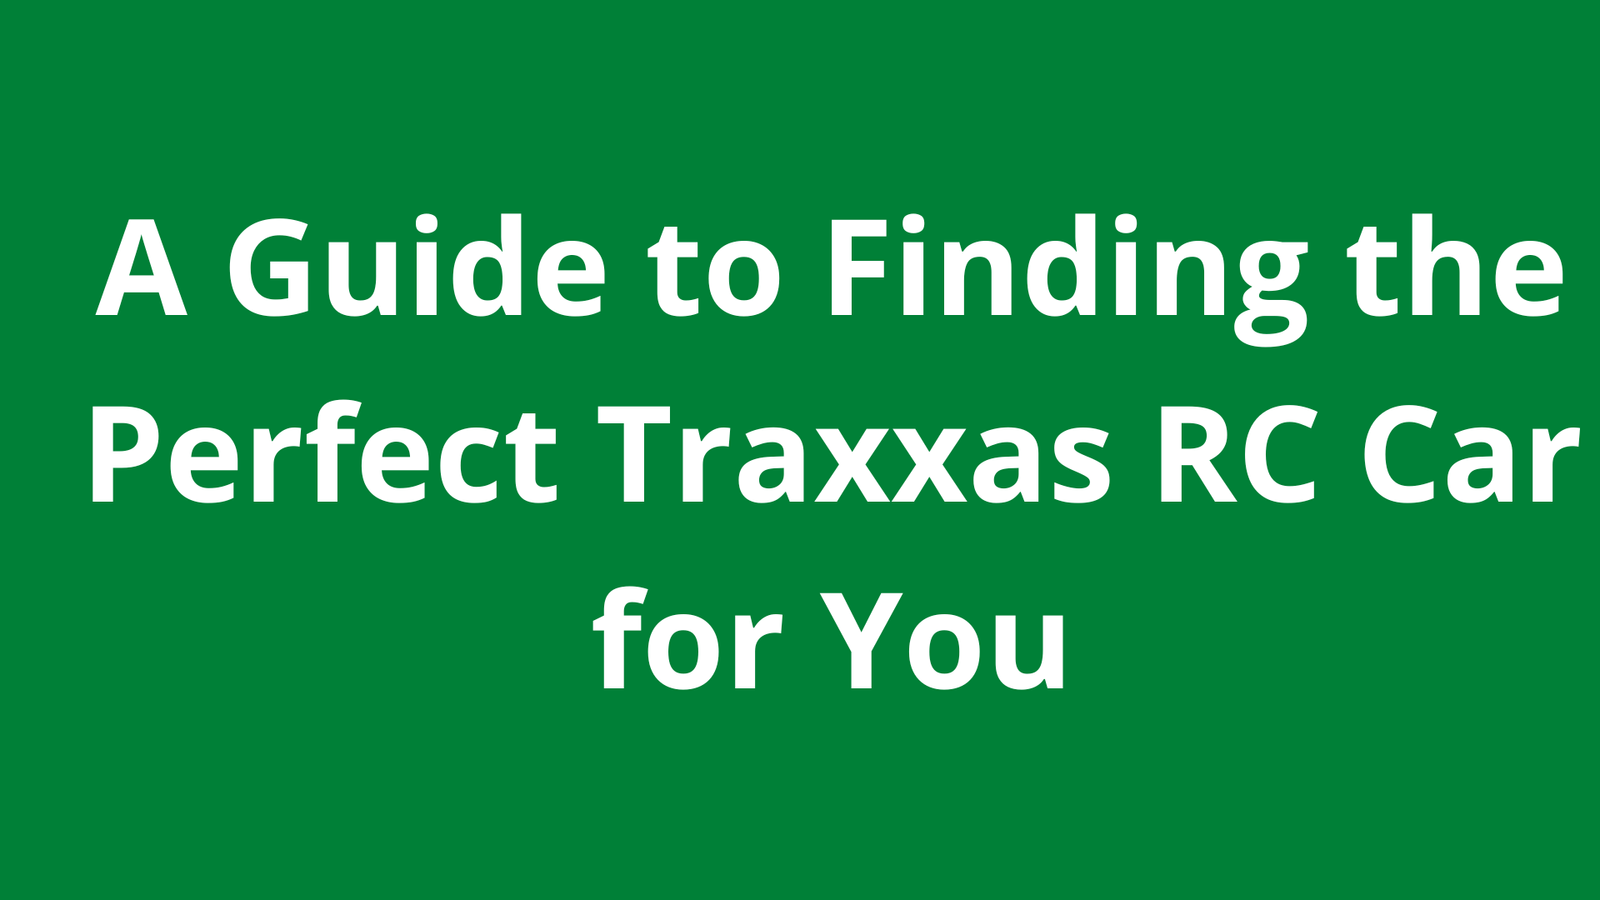 A Guide to Finding the Perfect Traxxas RC Car for You